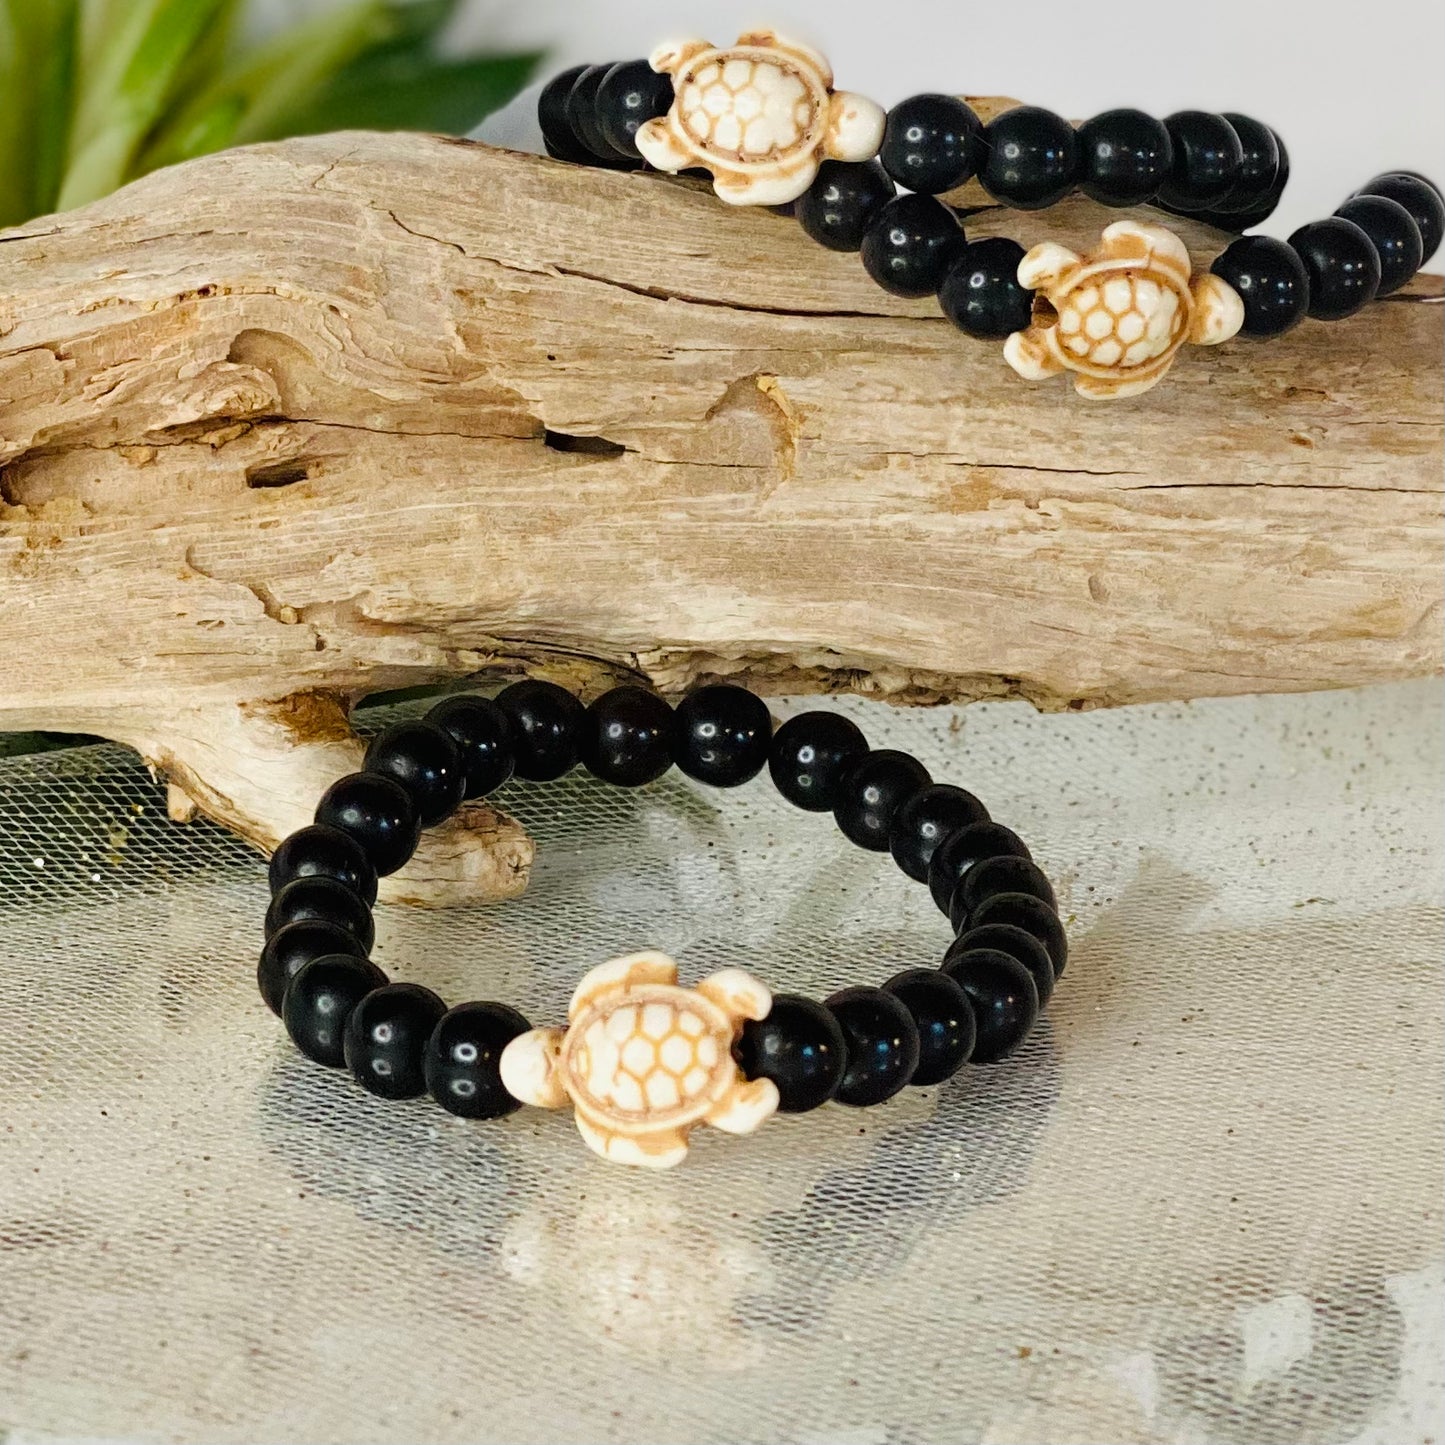 Blue Howlite or Black Bead 7-Inch Stretch Crystal Bracelet with Adorable Turtle Charm